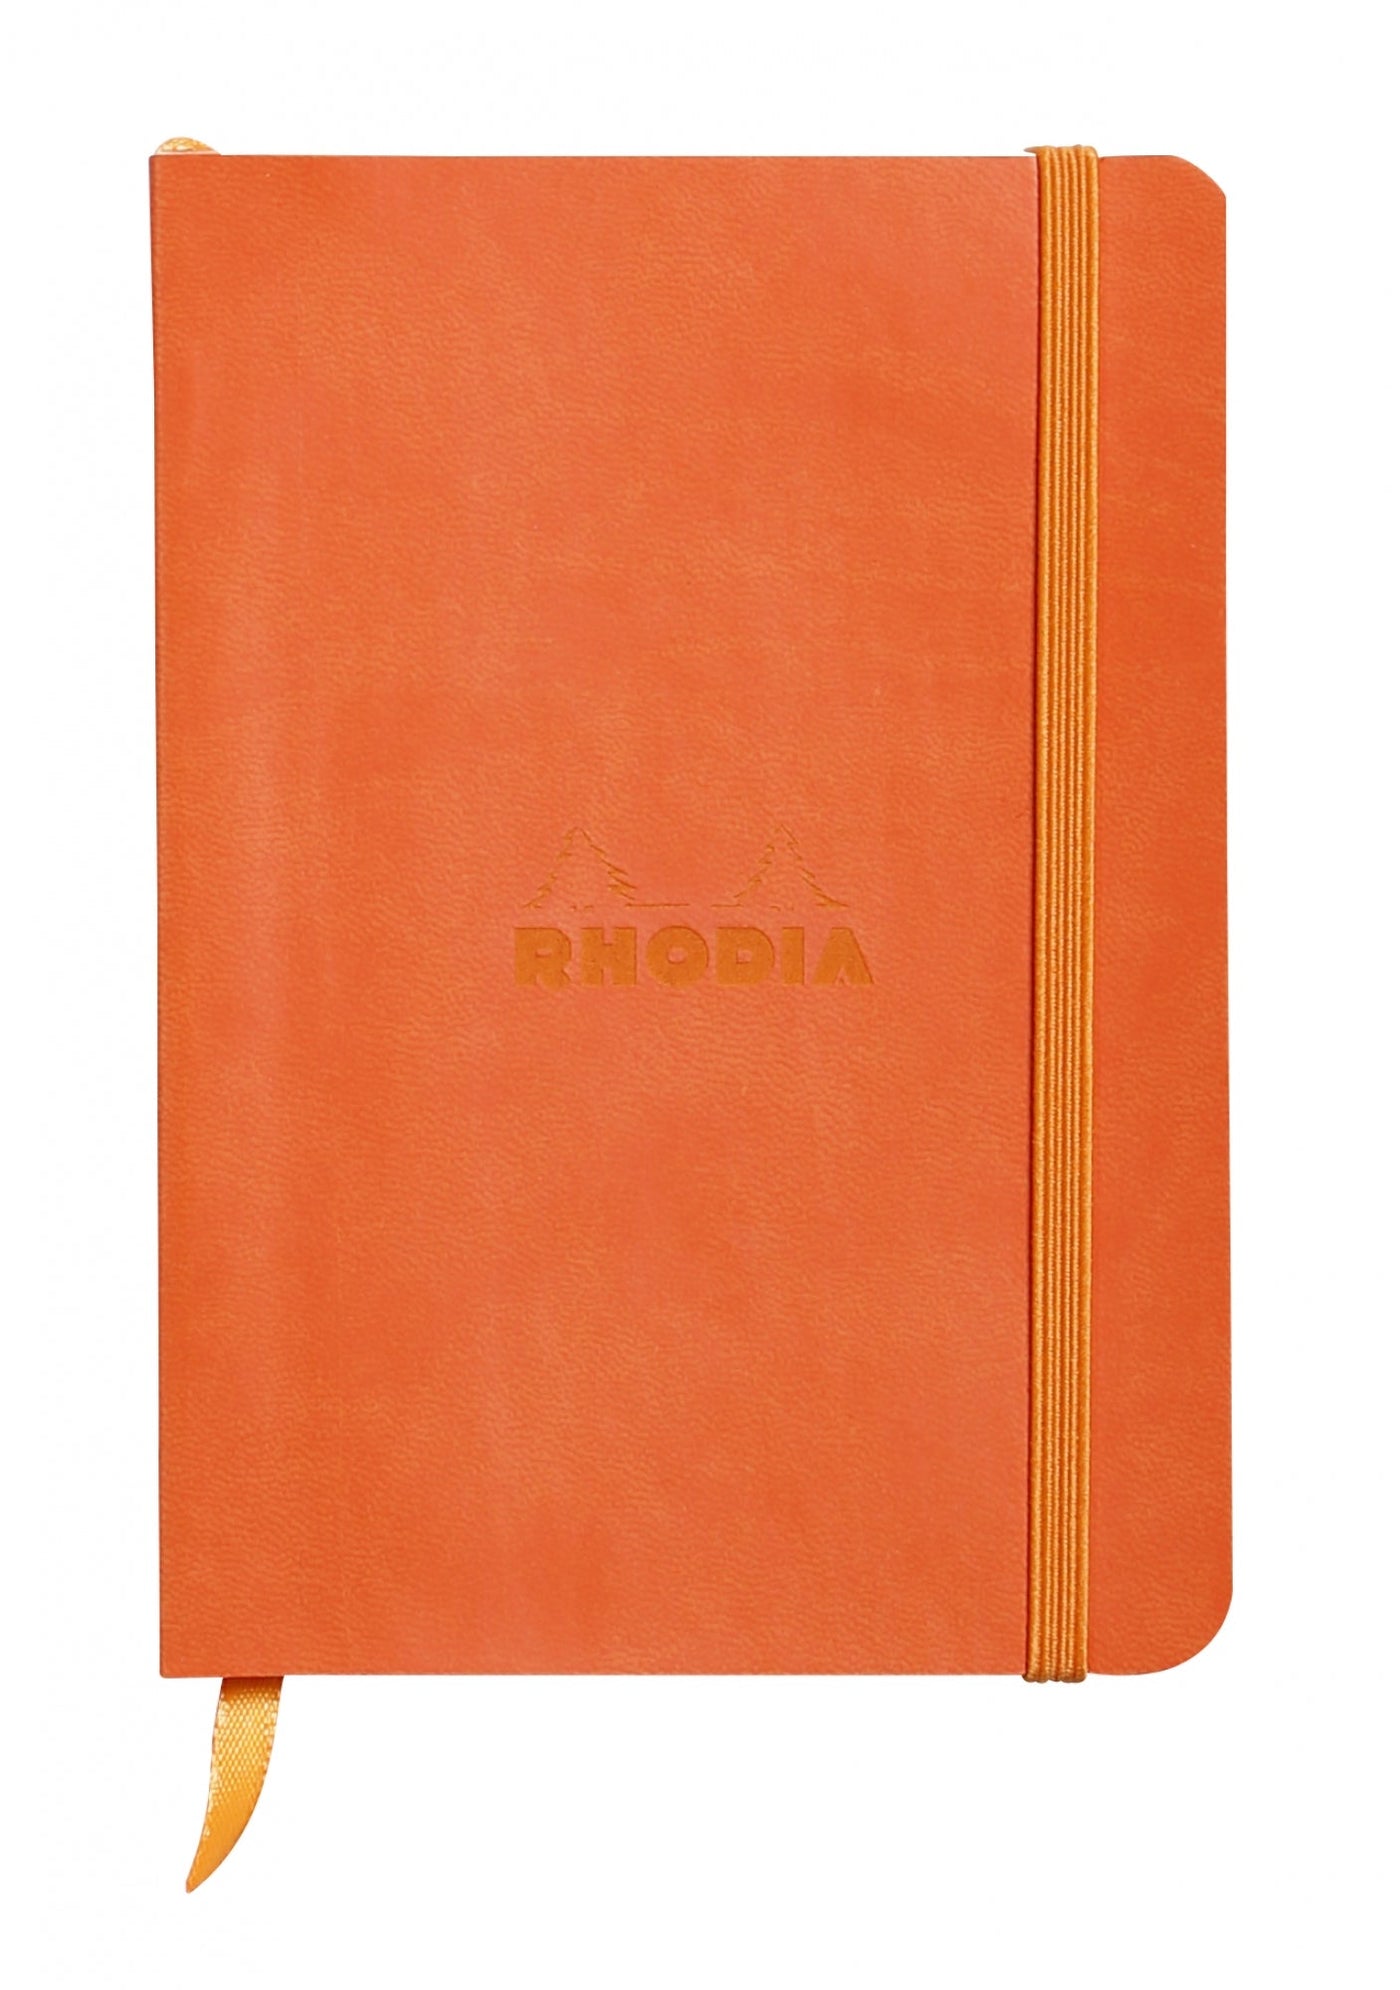 Rhodia Rhodiarama Soft Cover A6 Tangerine Lined Notebook